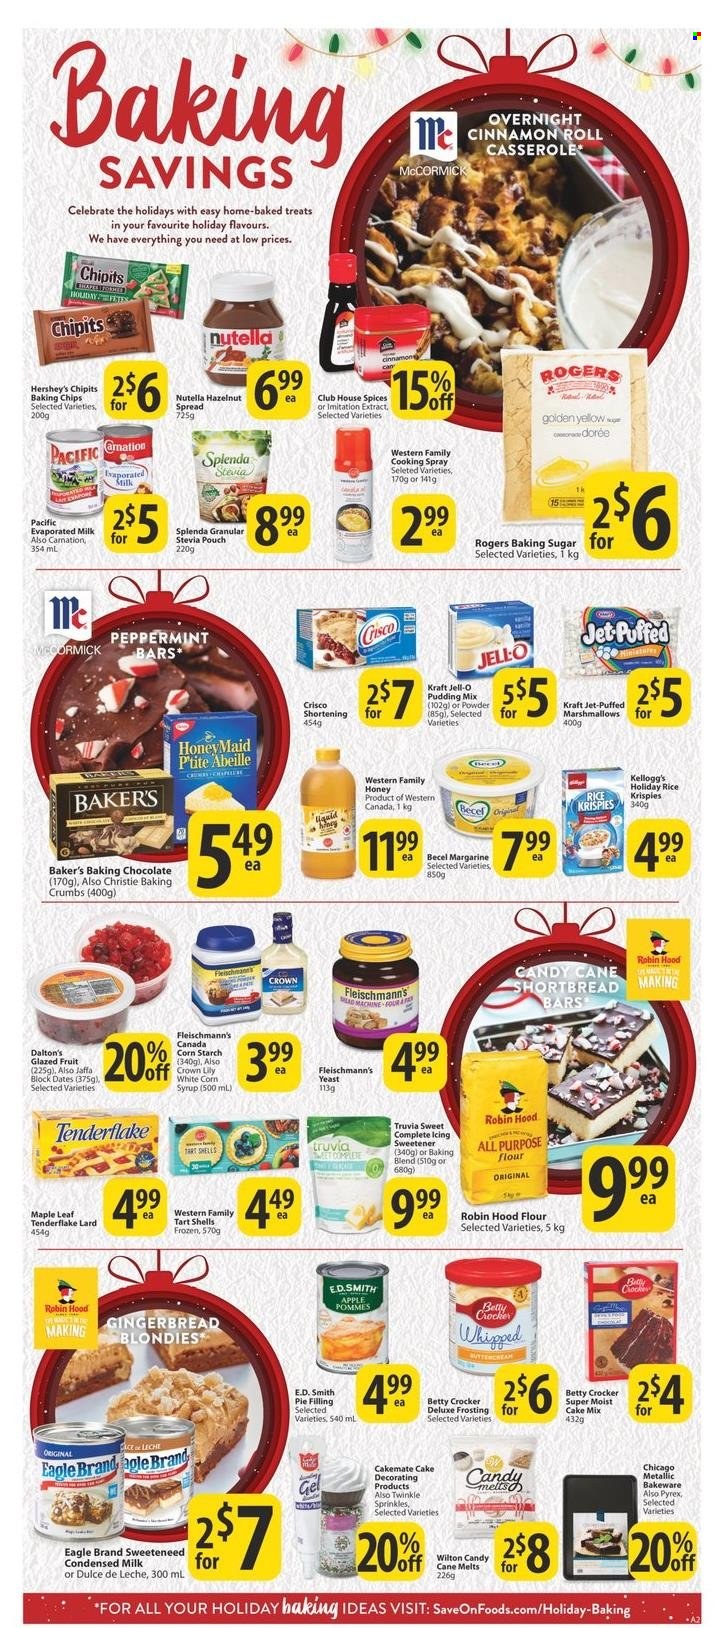 thumbnail - Save-On-Foods Flyer - December 01, 2022 - December 07, 2022 - Sales products - tart, cinnamon roll, gingerbread, cake mix, Kraft®, pudding, evaporated milk, condensed milk, yeast, margarine, Hershey's, marshmallows, chocolate, candy cane, Kellogg's, all purpose flour, Crisco, flour, frosting, shortening, sugar, pie filling, Jell-O, baking chips, stevia, sweetener, Rice Krispies, Honey Maid, cooking spray, syrup, hazelnut spread, Jet, casserole, bakeware, Pyrex, lard, Nutella. Page 11.